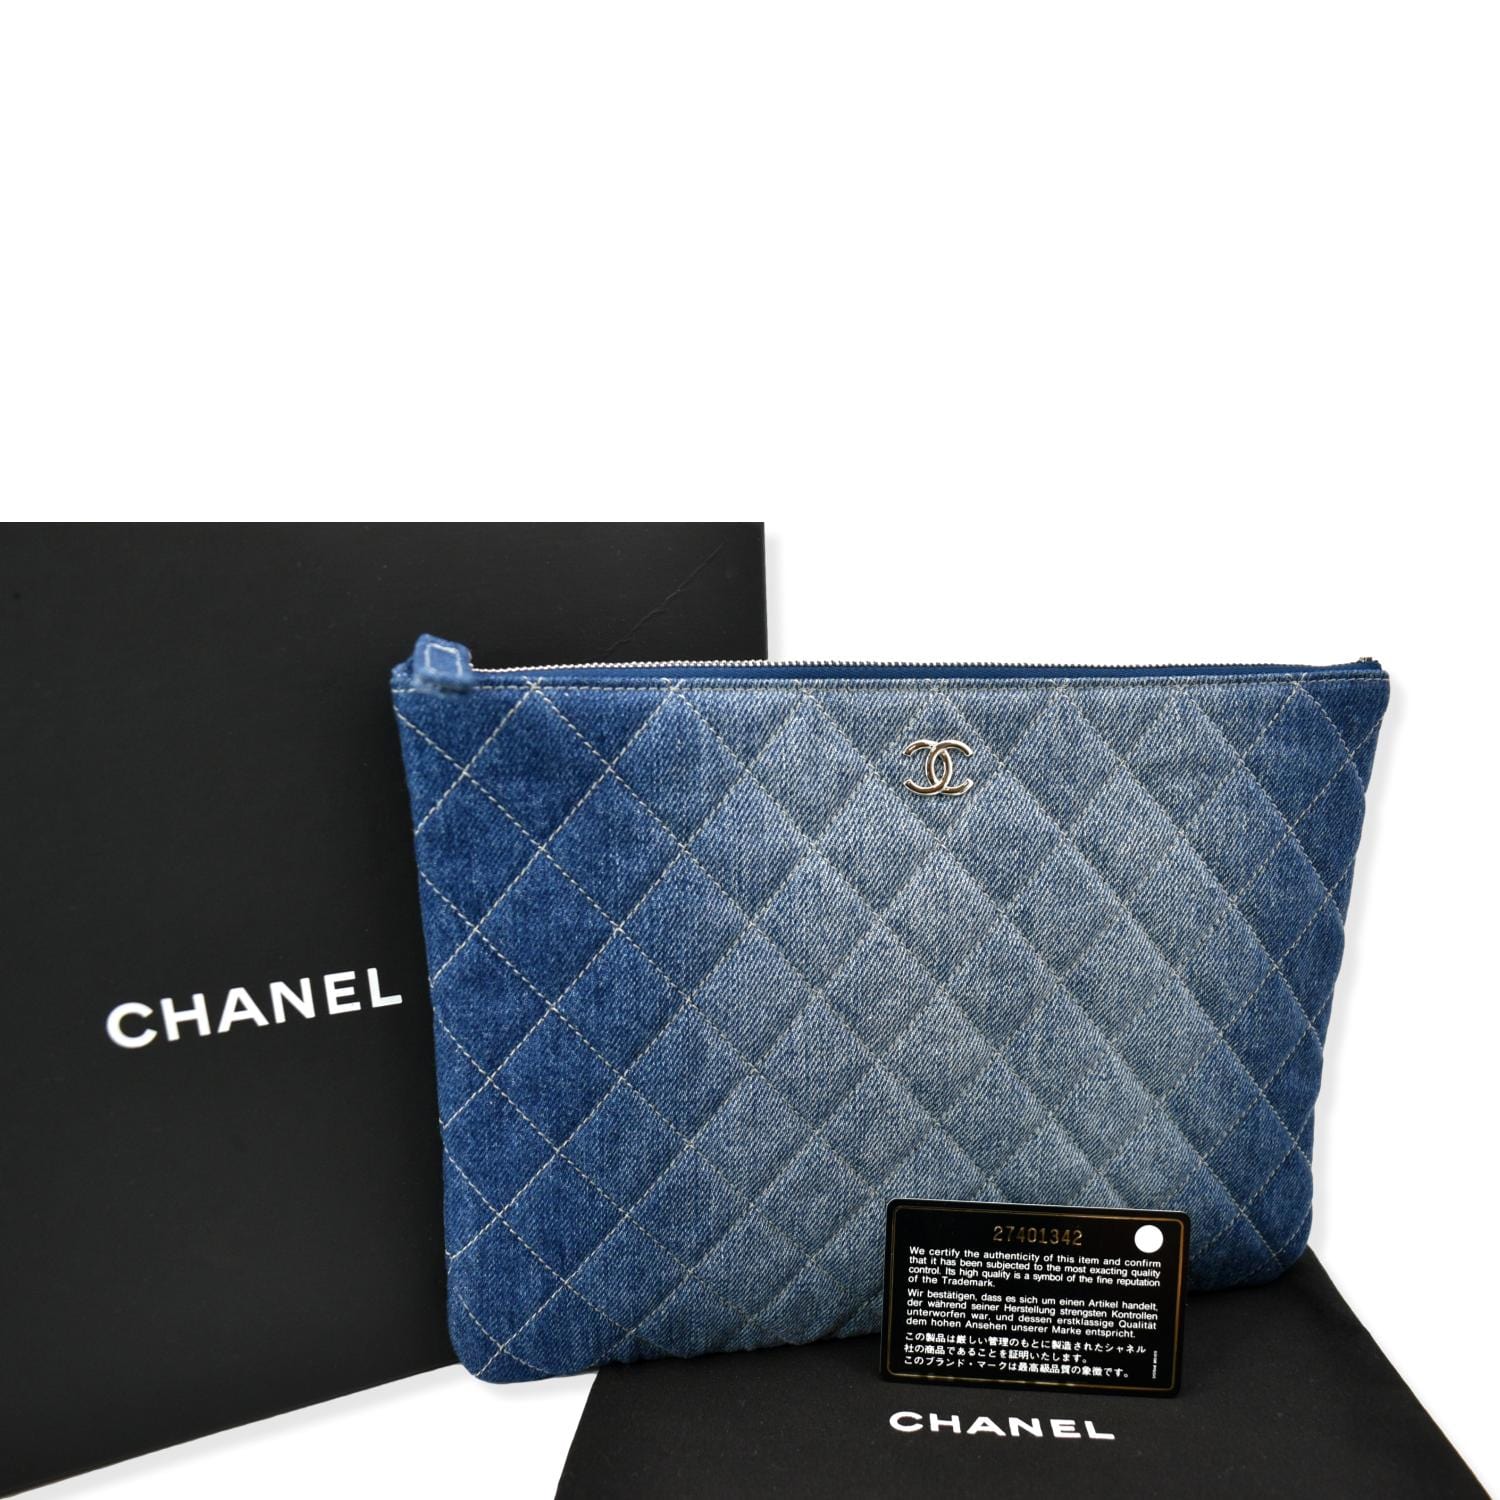 BNIB Chanel 18K Navy Blue Large Clutch O case Lmt Ed Charms Full Set  Authentic